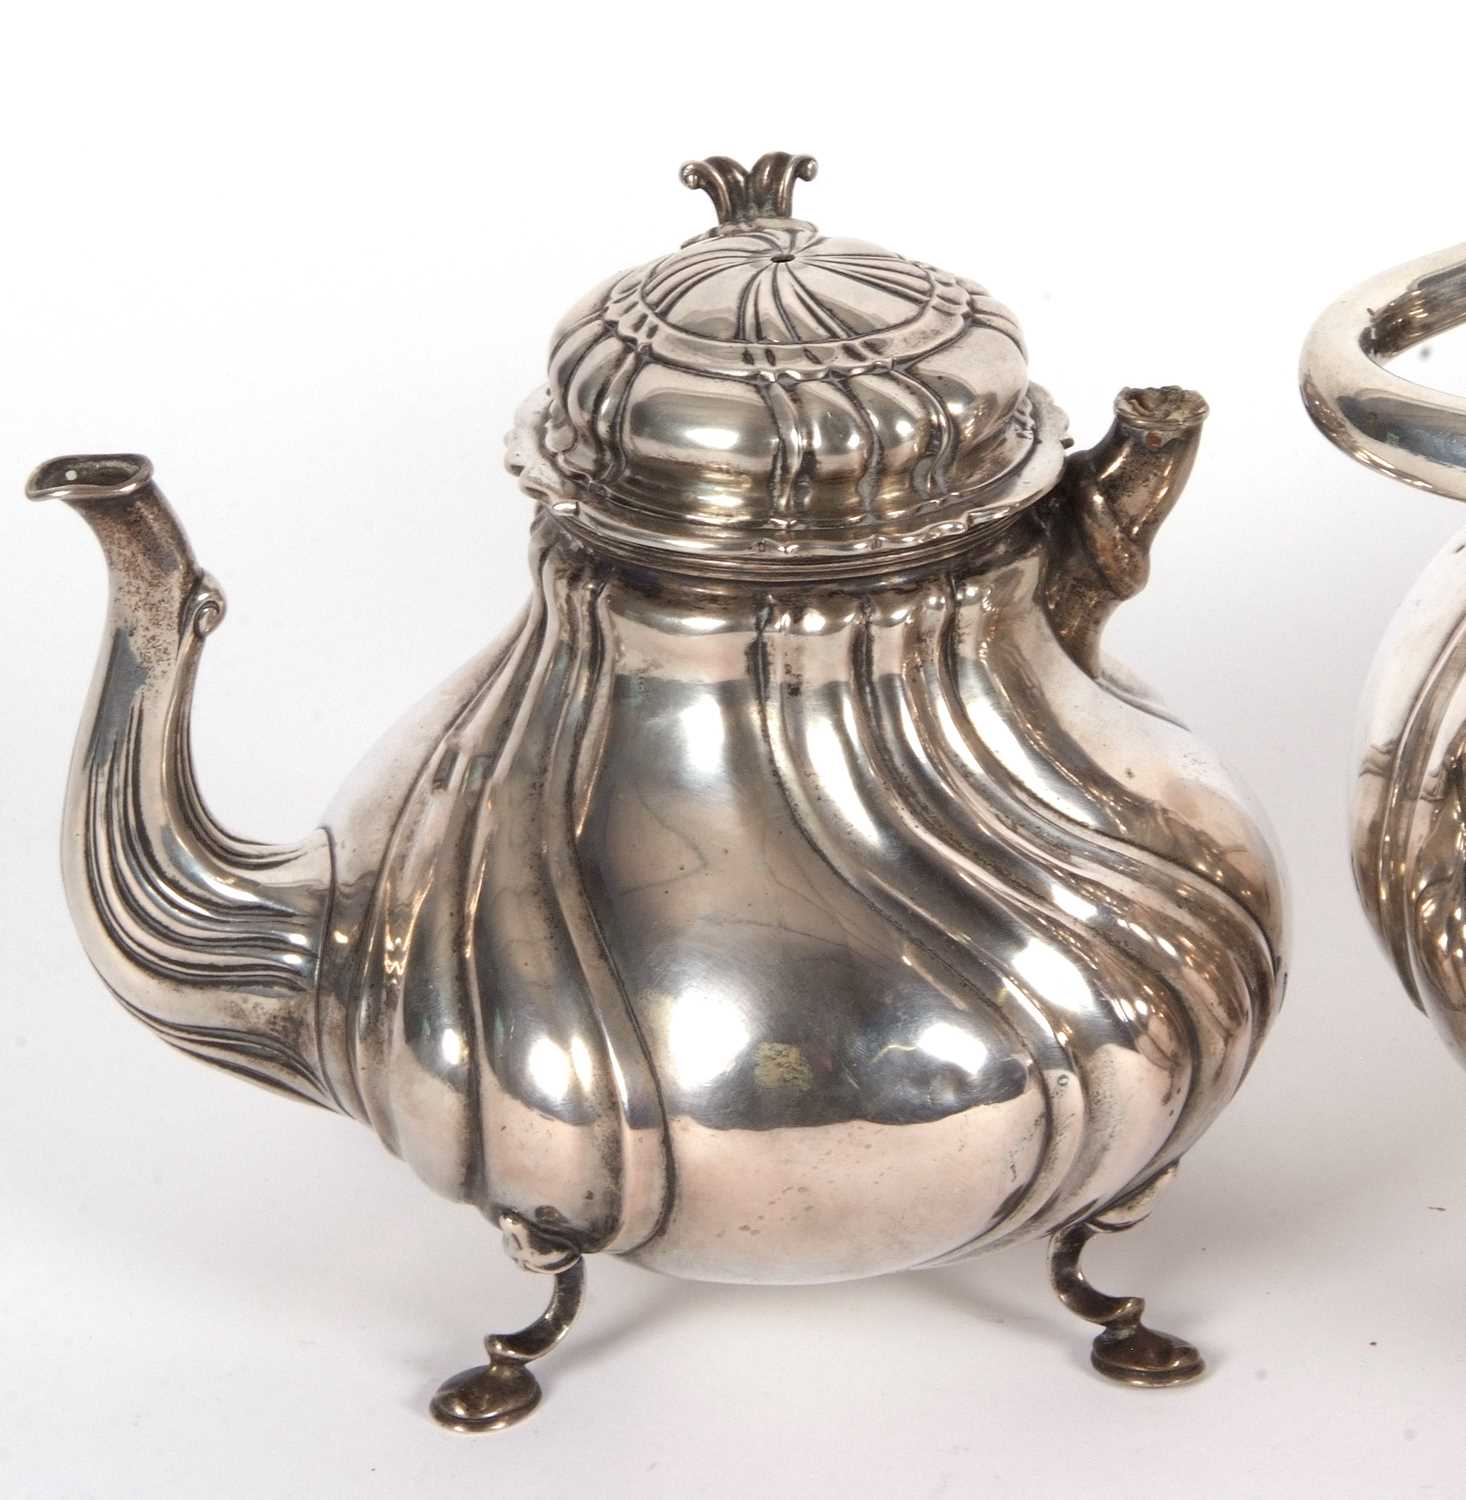 A 19th Century German white metal tea set comprising a large coffee pot, teapot, hot water kettle, - Image 3 of 9